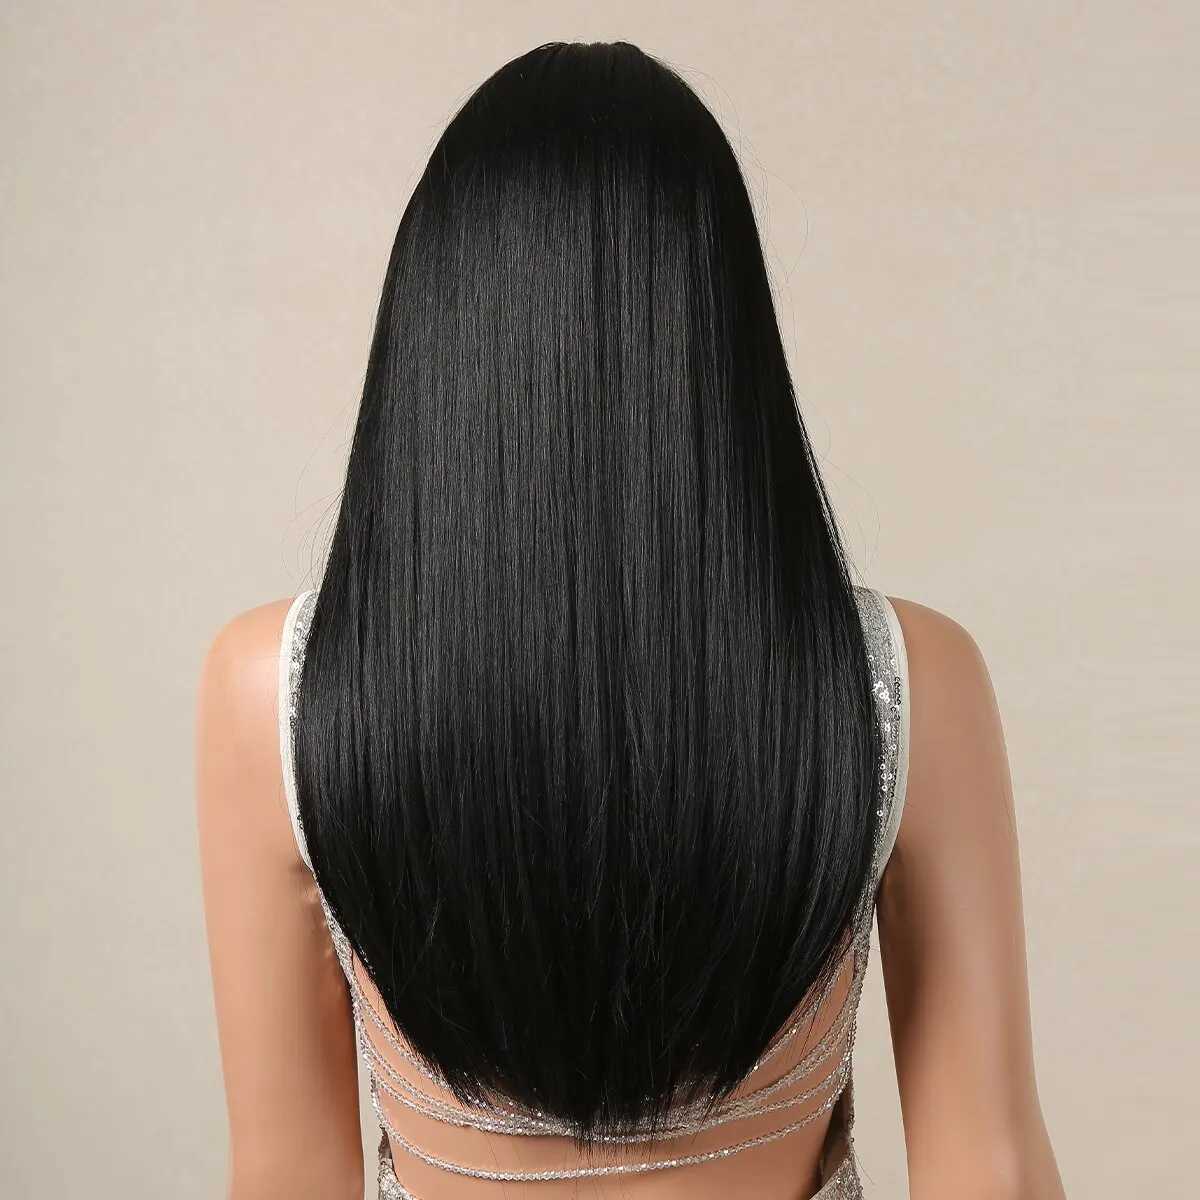 Synthetic Wigs Cosplay Wigs Black Hair Long Straight Wigs for Women Natural Hair Synthetic Wigs Daily Cosplay Heat Resistant 240328 240327